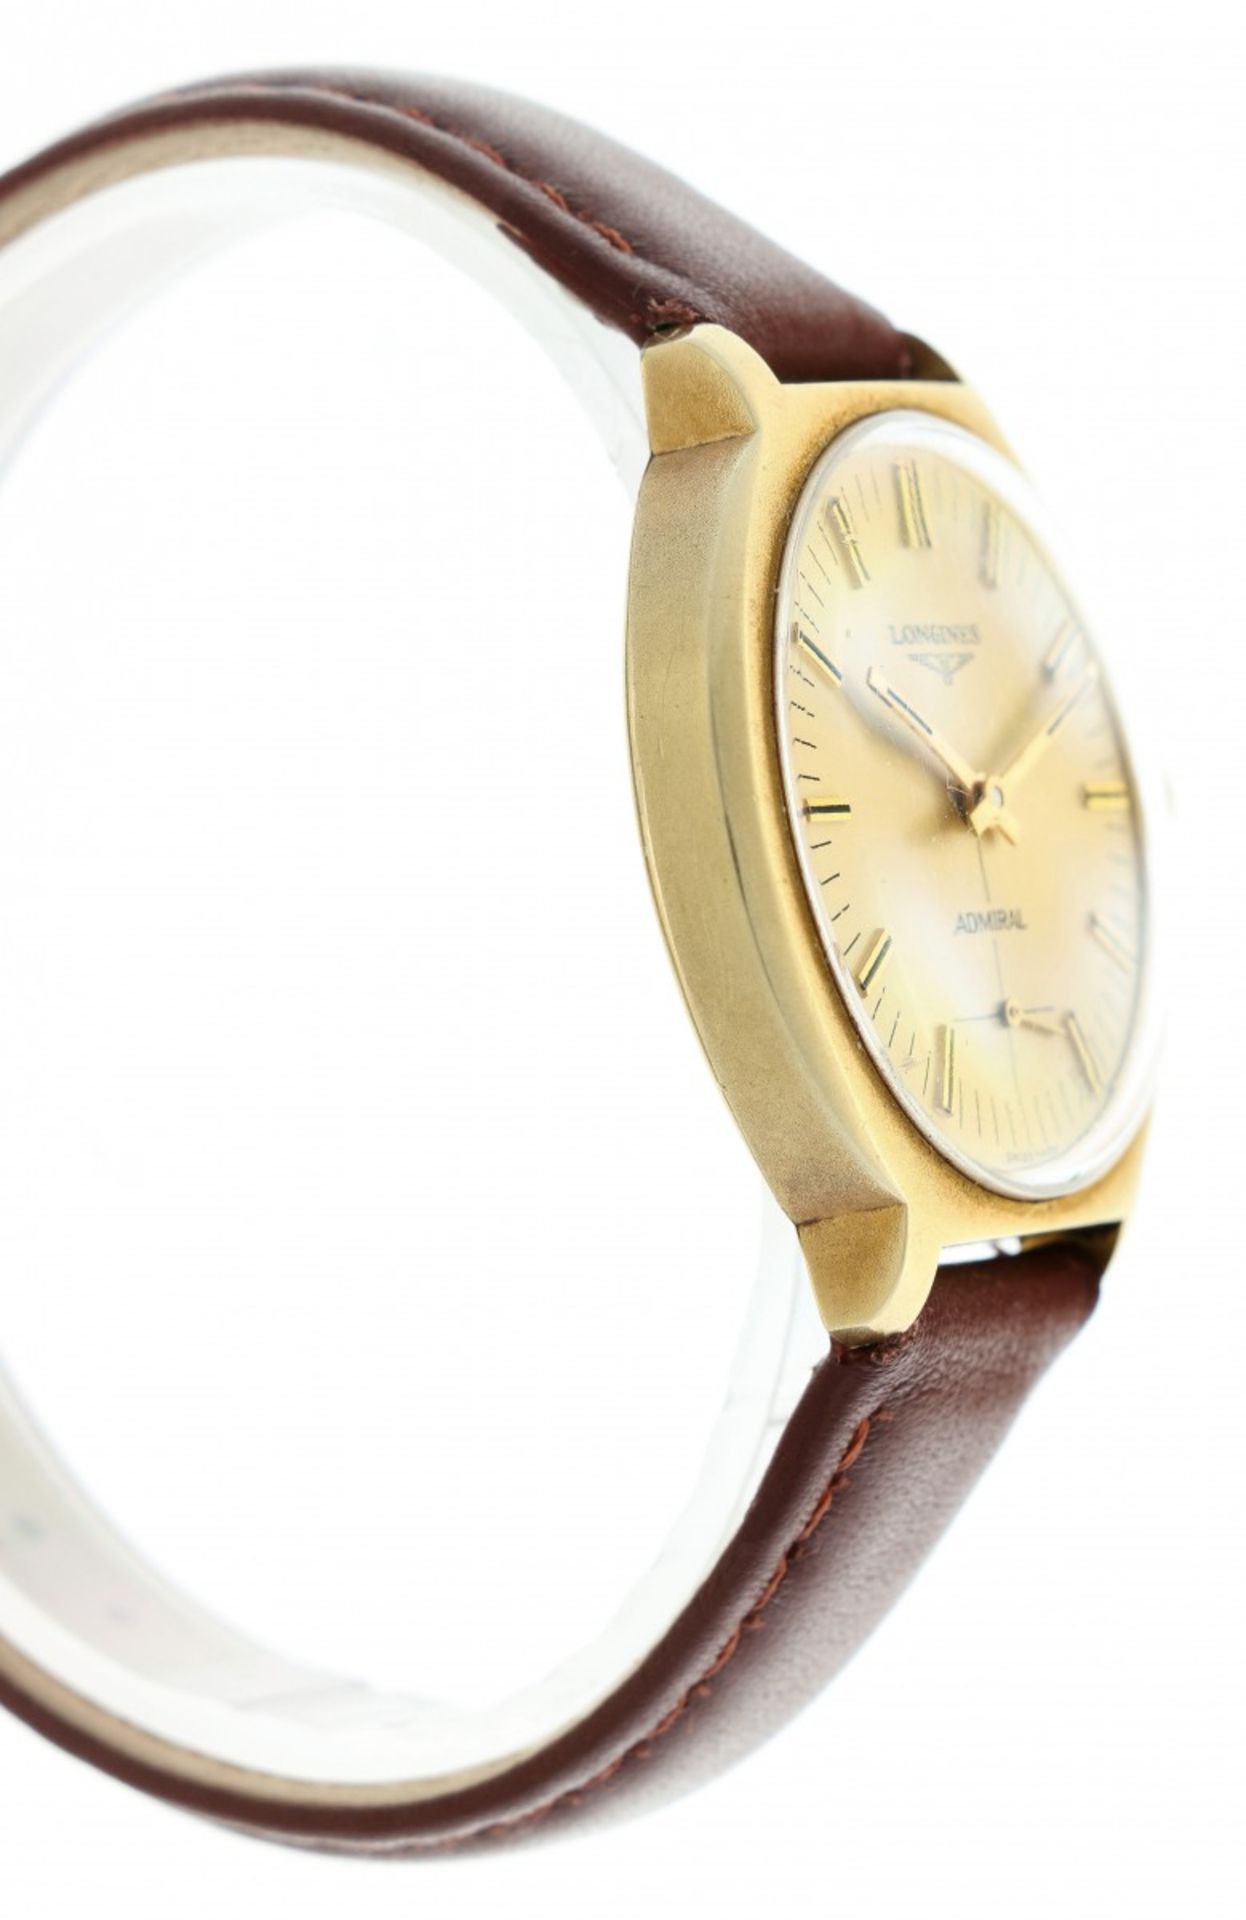 Longines Admiral - Men's Watch - appr. 1970 - Image 4 of 5